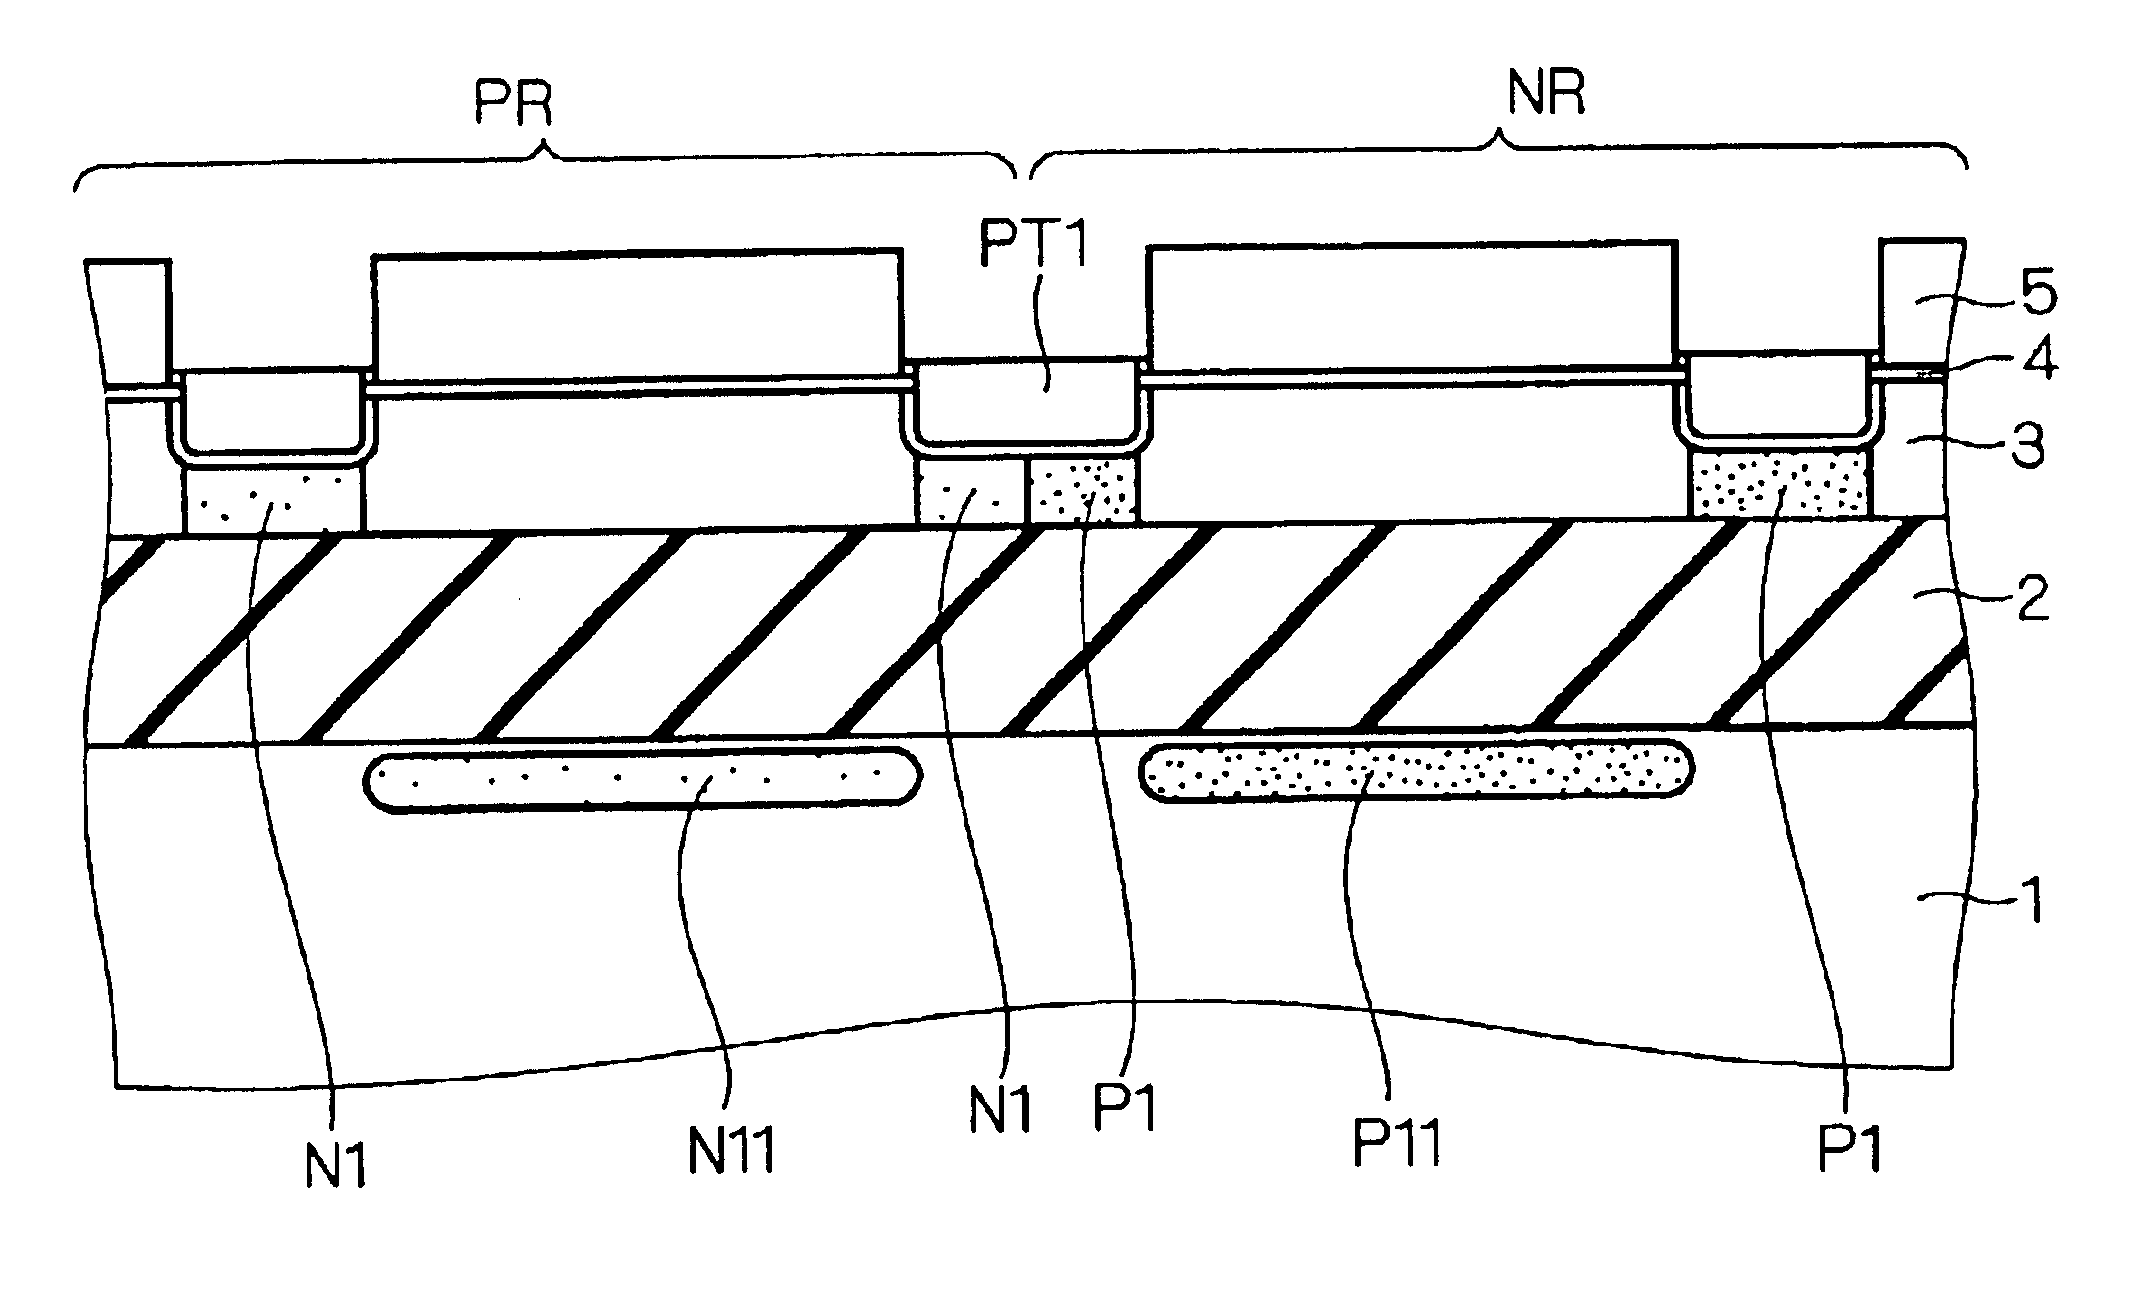 Semiconductor device having a trench isolation and method of fabricating the same